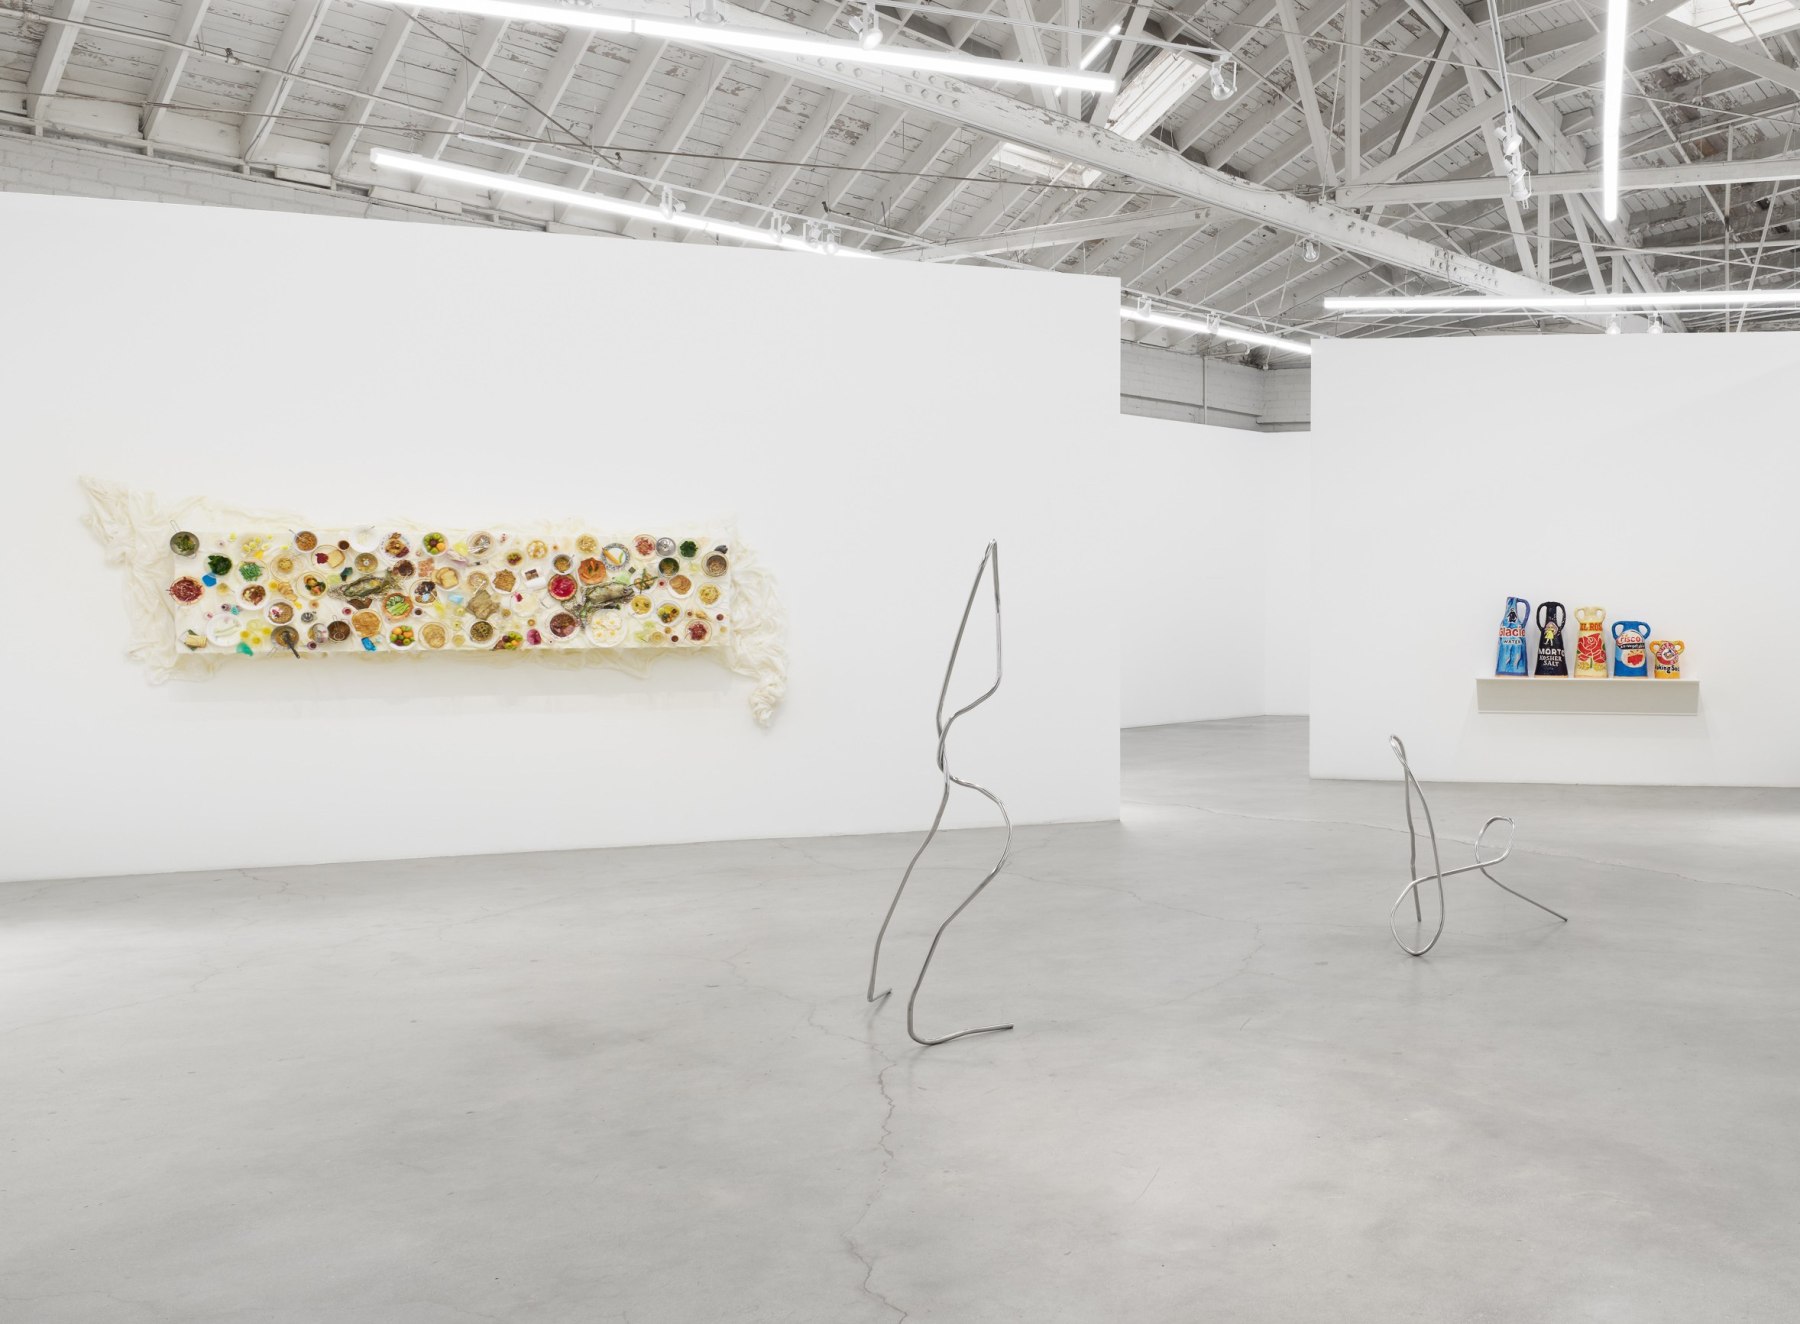 Installation view of Majeure Force, Part Two, featuring works by Samara Golden, Josh Callaghan, and Grant Levy-Lucero.